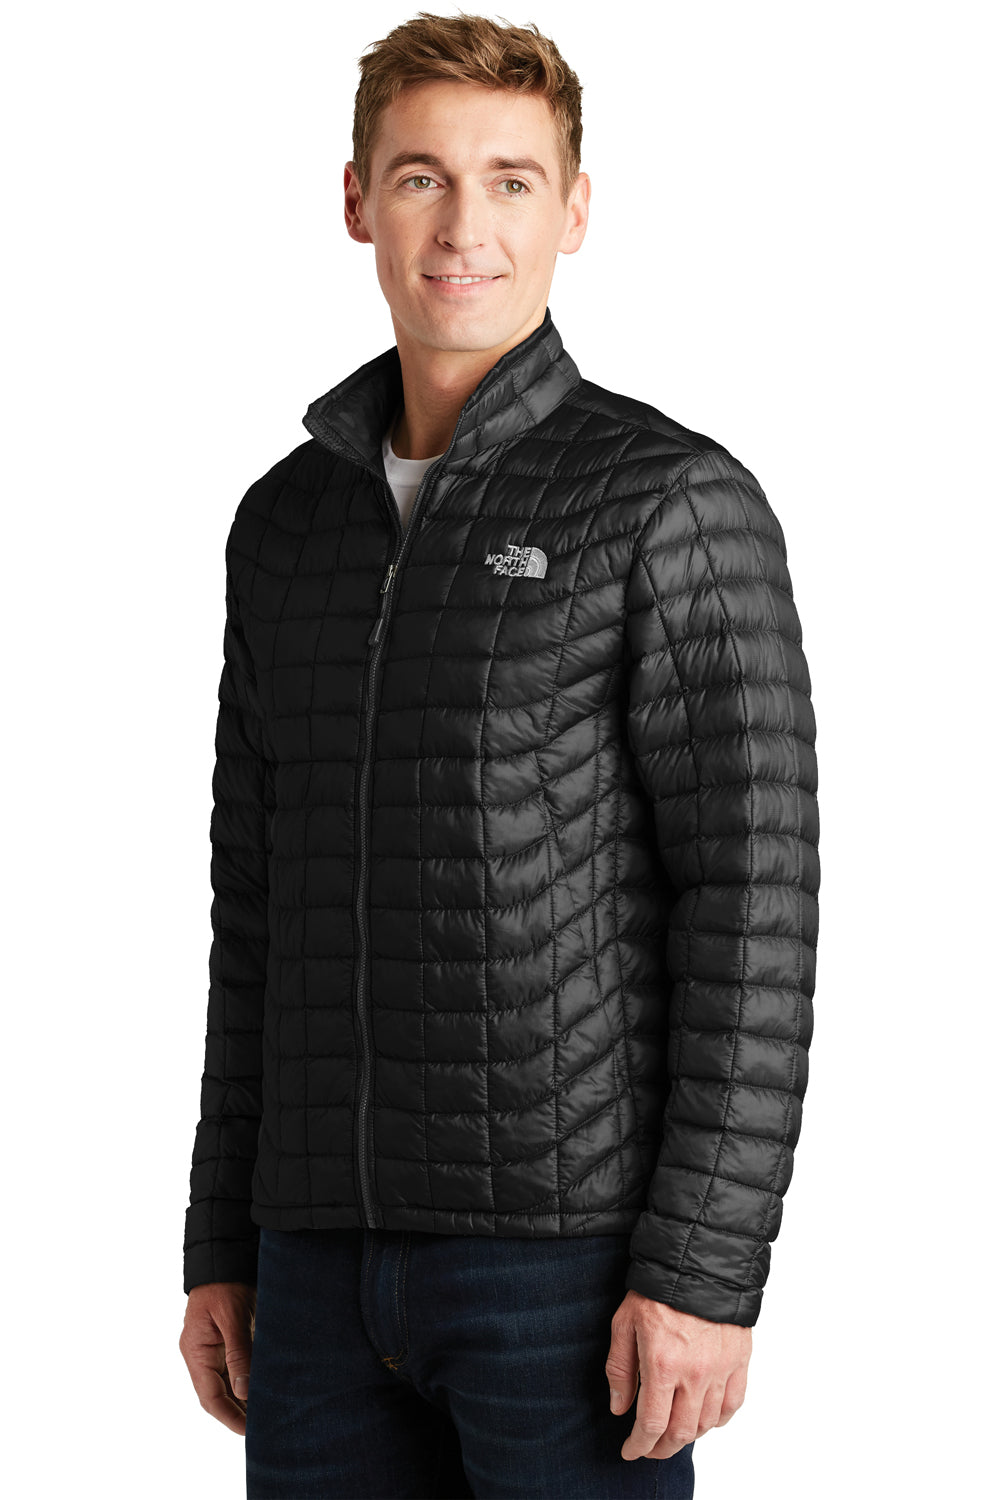 The North Face NF0A3LH2 Mens ThermoBall Trekker Water Resistant Full Zip Jacket Matte Black 3Q